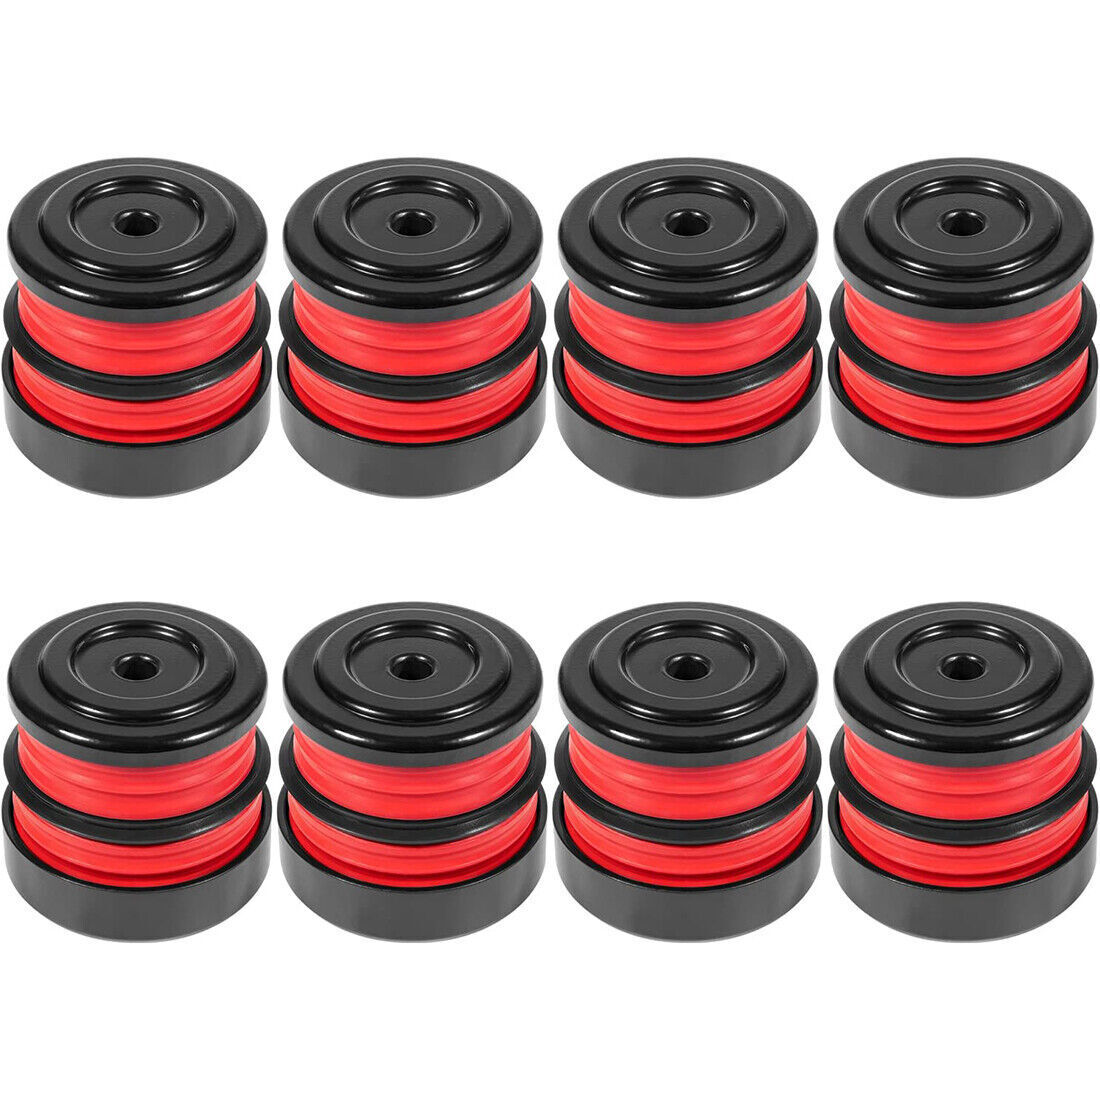 Silicone Body Mount Bushings for 2008-2016 Ford Super Duty F-250/F-350